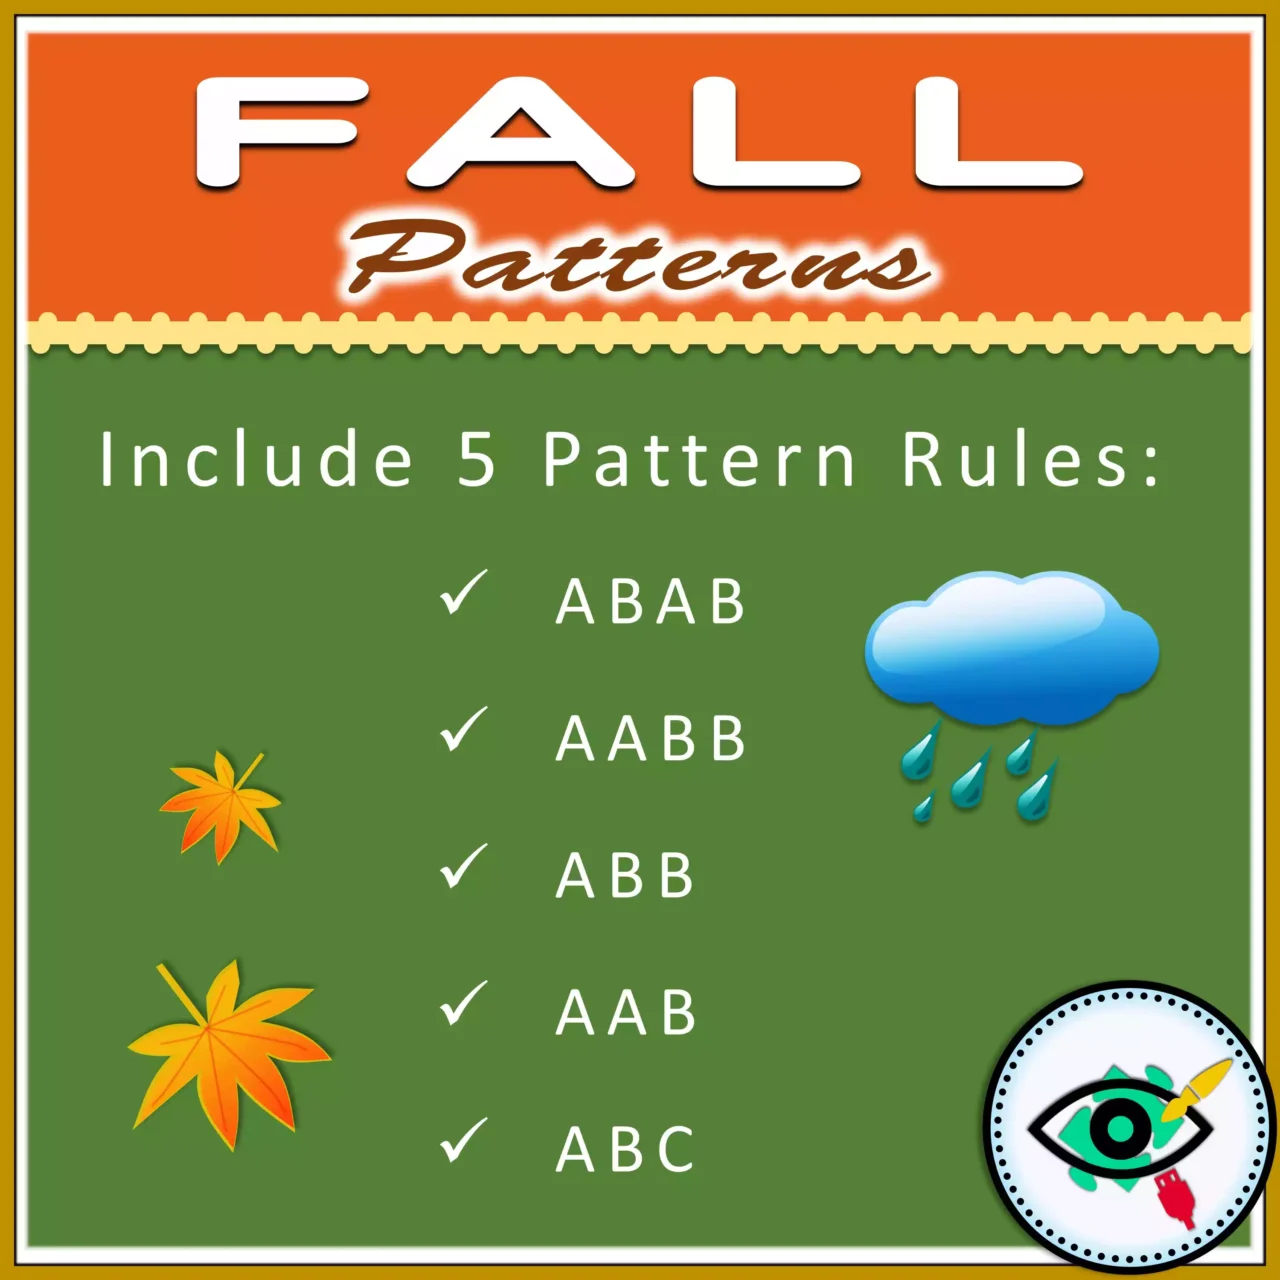 Fall - Patterns Activity - Image Title 1